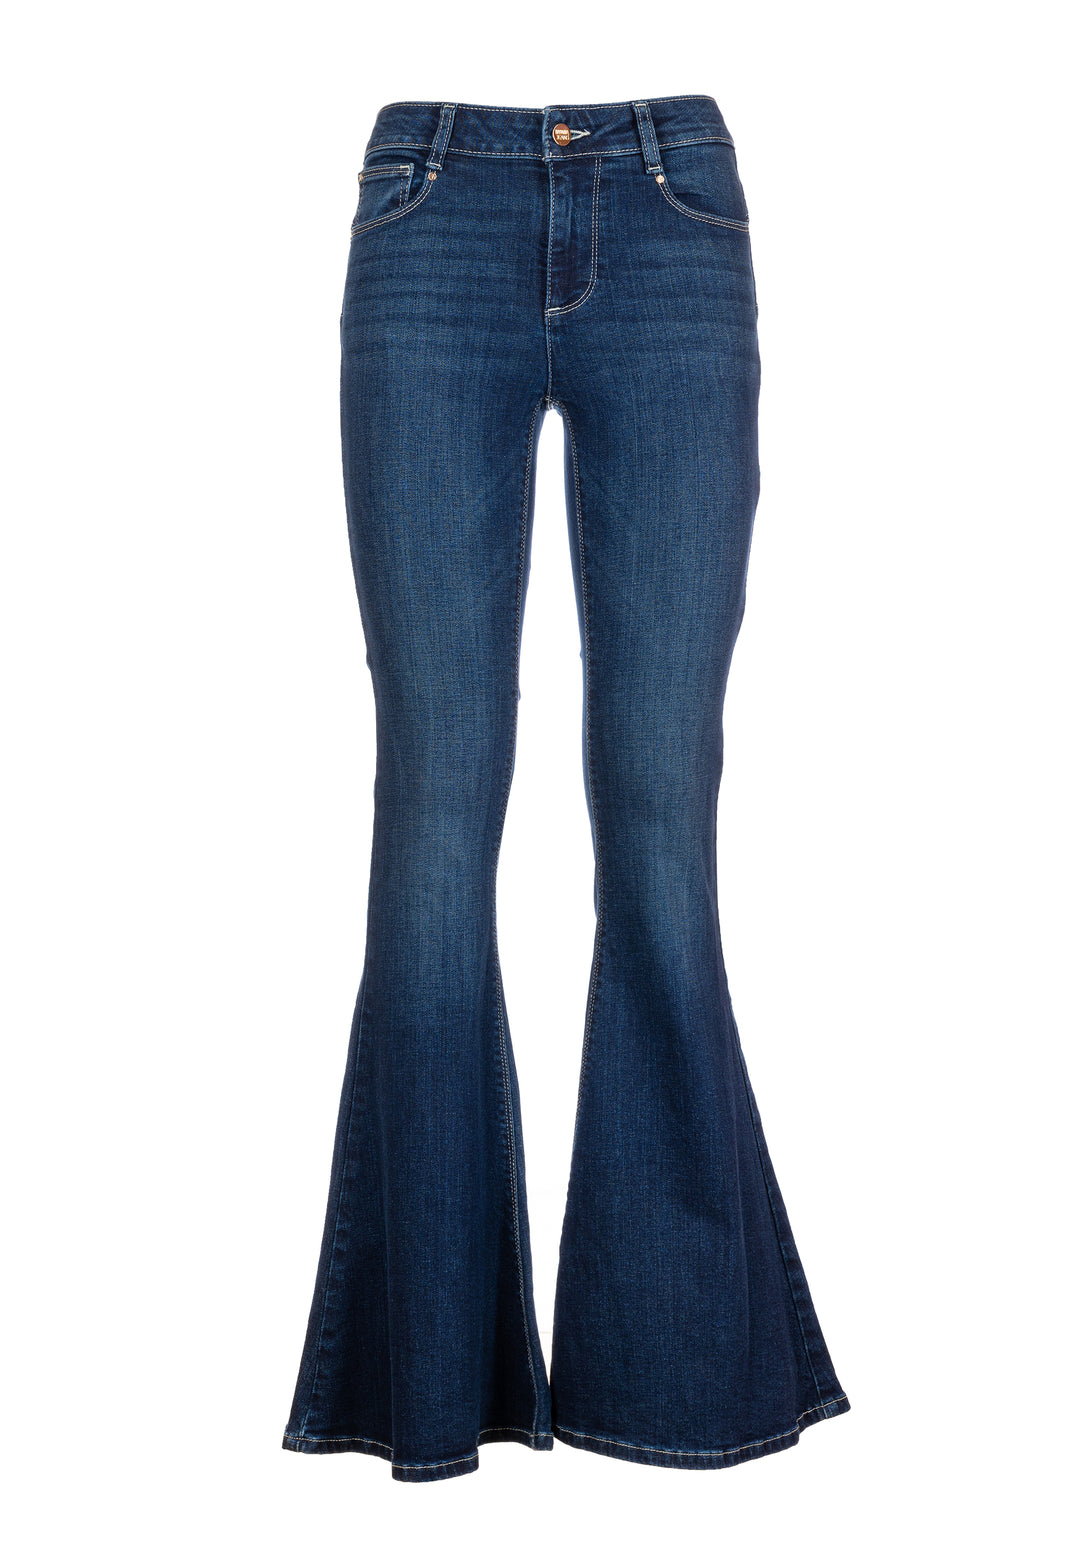 Jeans flare with push up effect made in denim with middle wash